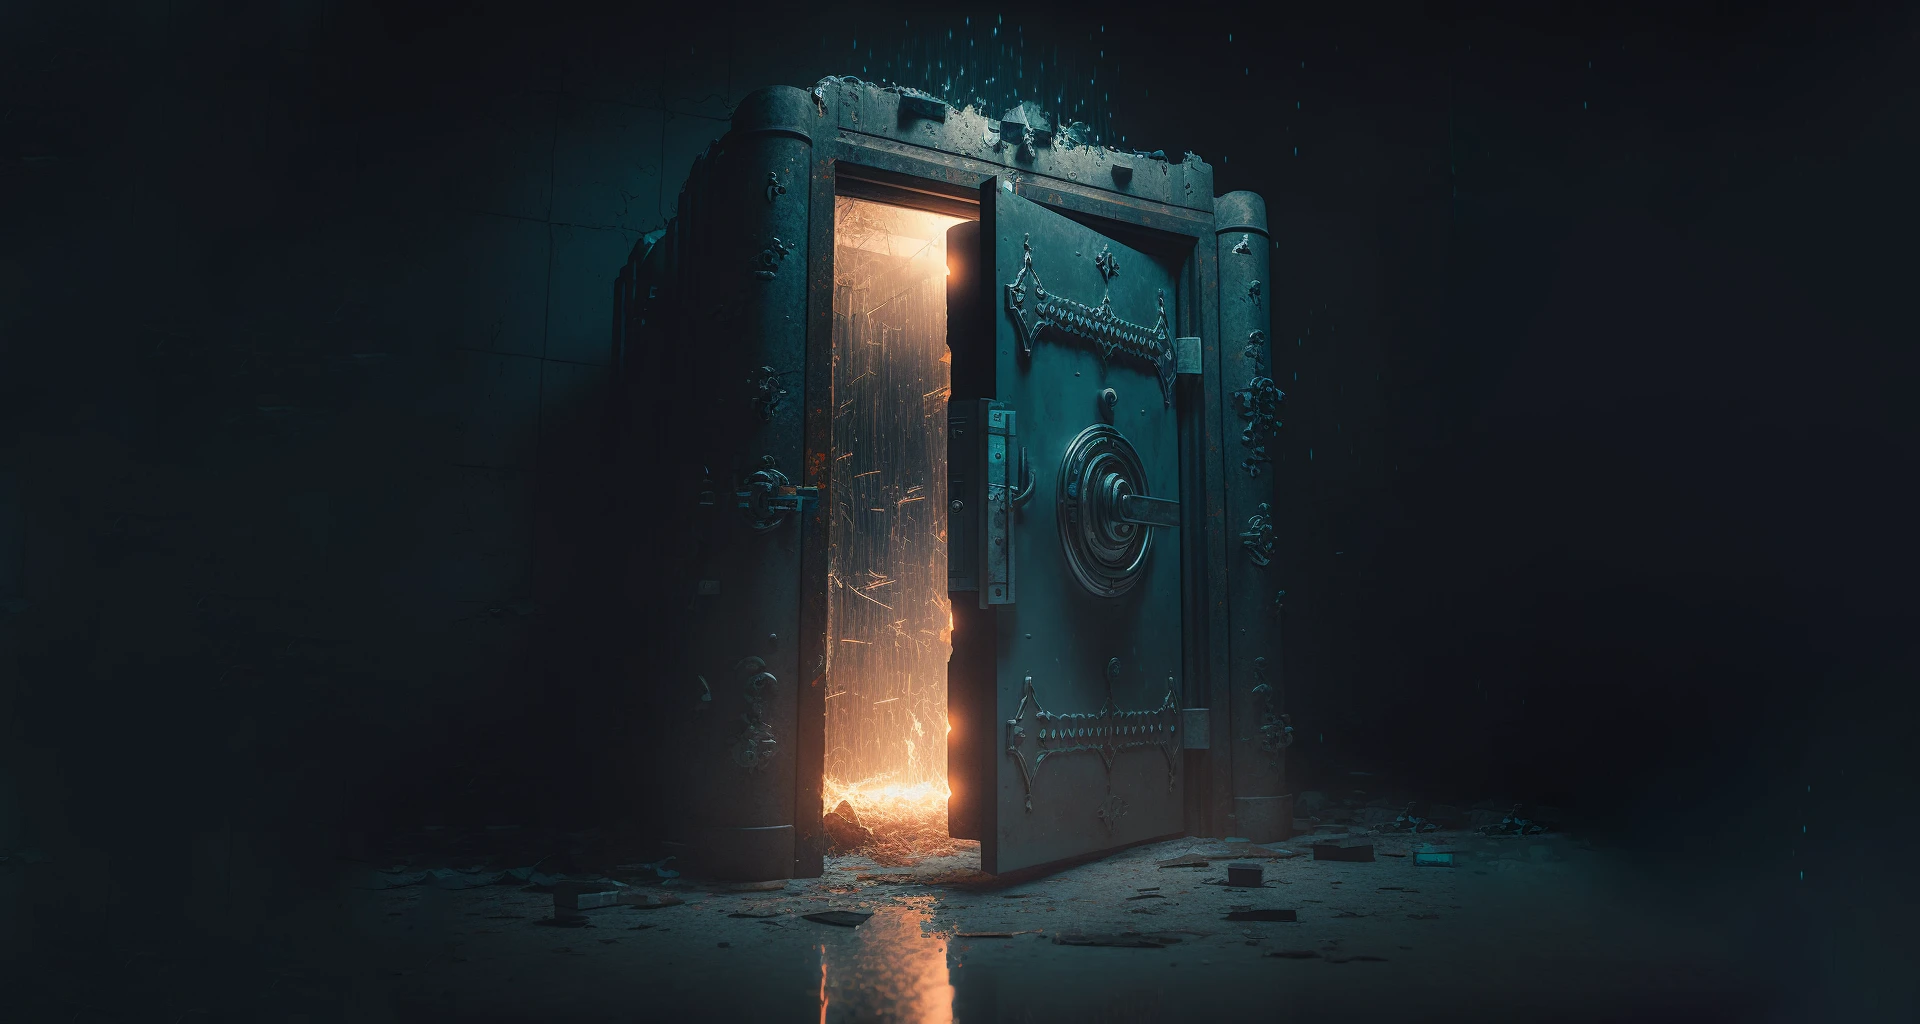 A mysterious, heavy vault door slightly ajar, emitting a bright light from within, surrounded by a dark, dusty environment, creating an eerie and suspenseful atmosphere.